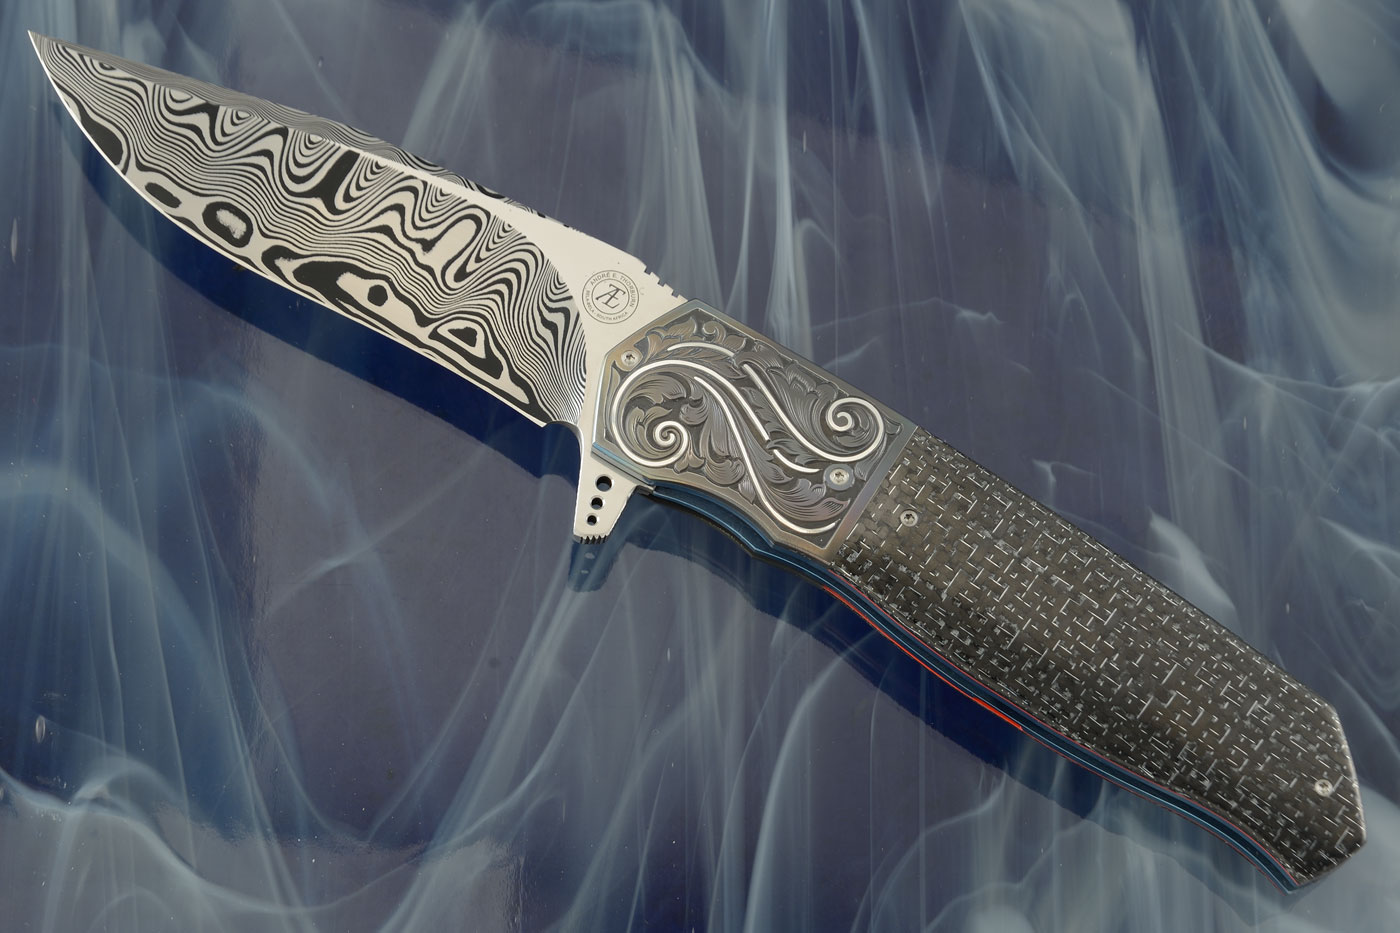 L36M Flipper with Silver Strike Carbon Fiber, Zirconium, and Damasteel - Engraved Scrolls and Silver Inlay (Ceramic IKBS)